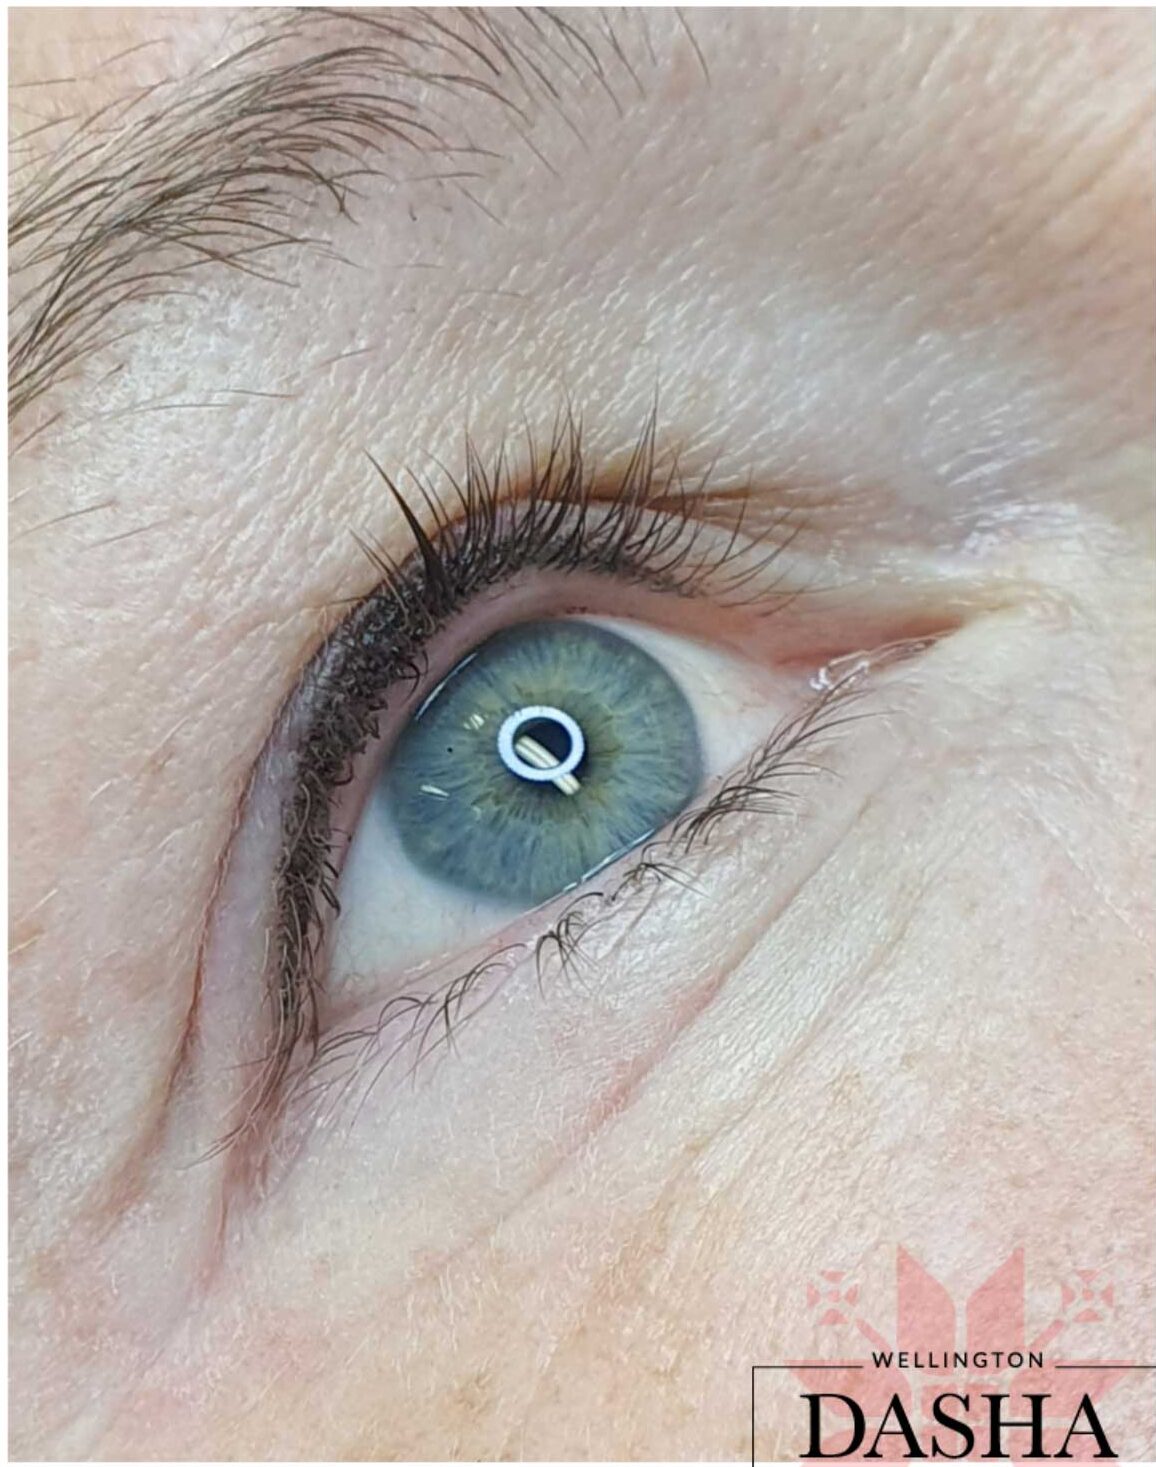 Bottom LashLine and Eyeliner Cosmetic Tattoo. Cosmetic and Mediical Tattoo by Dasha. Permanent makeup and reconstructive tattoo, scalp micro-pigmentation in Christchurch, New Zealand